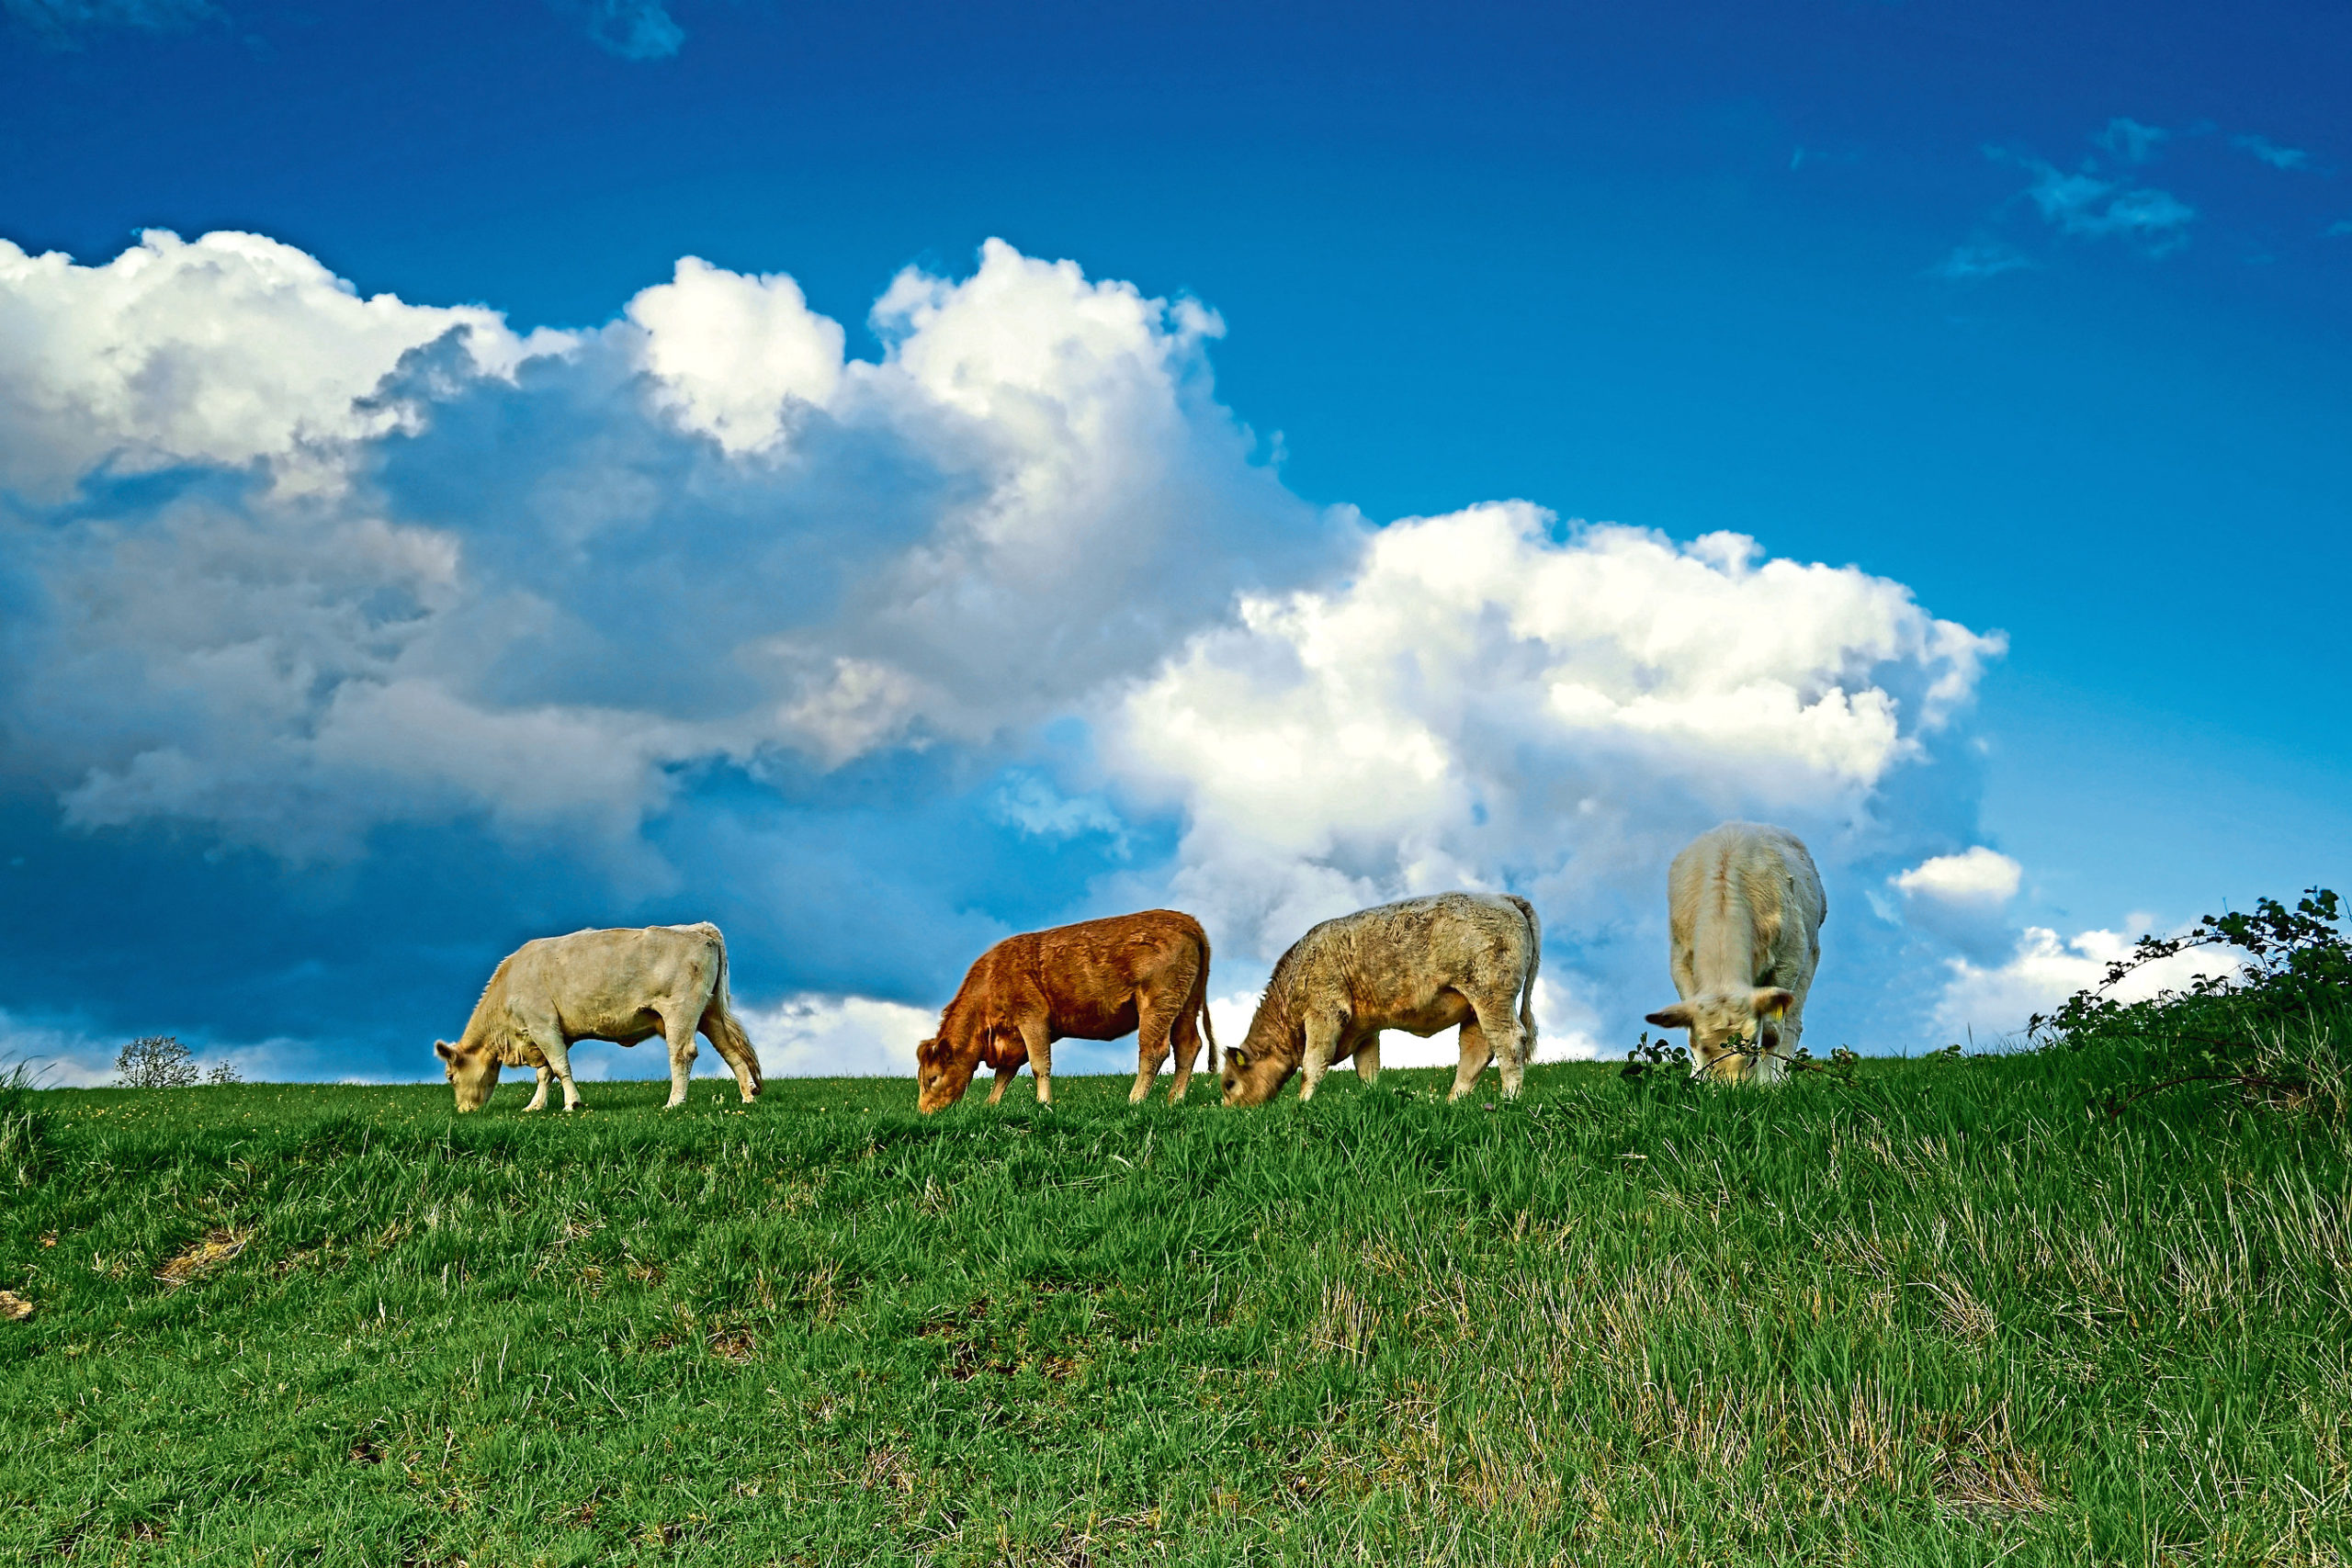 Scientists say the climate impact of grass-fed cattle herds may have been overestimated.